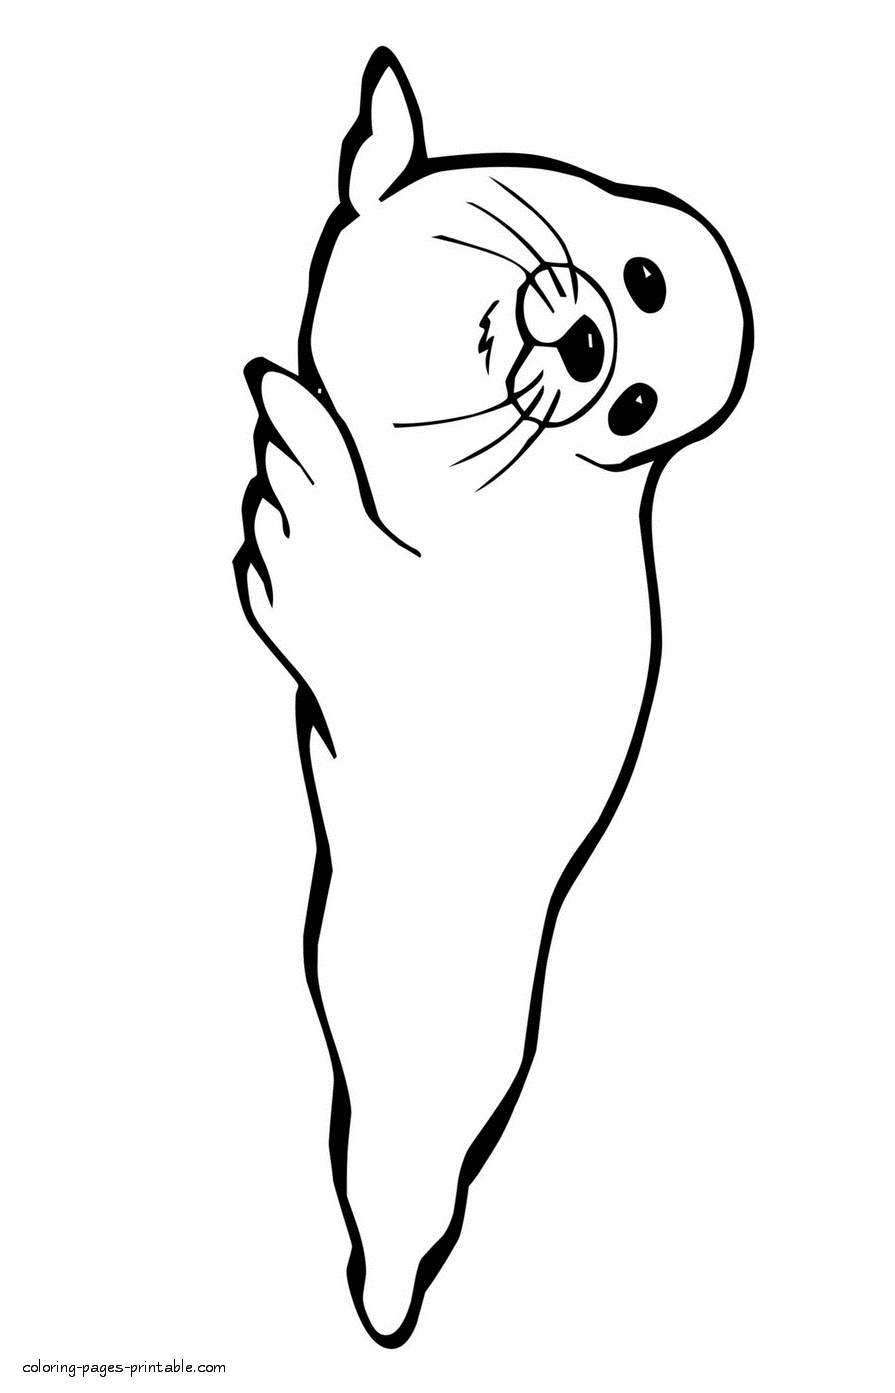 harbor-seal-coloring-page-coloring-pages-printable-com